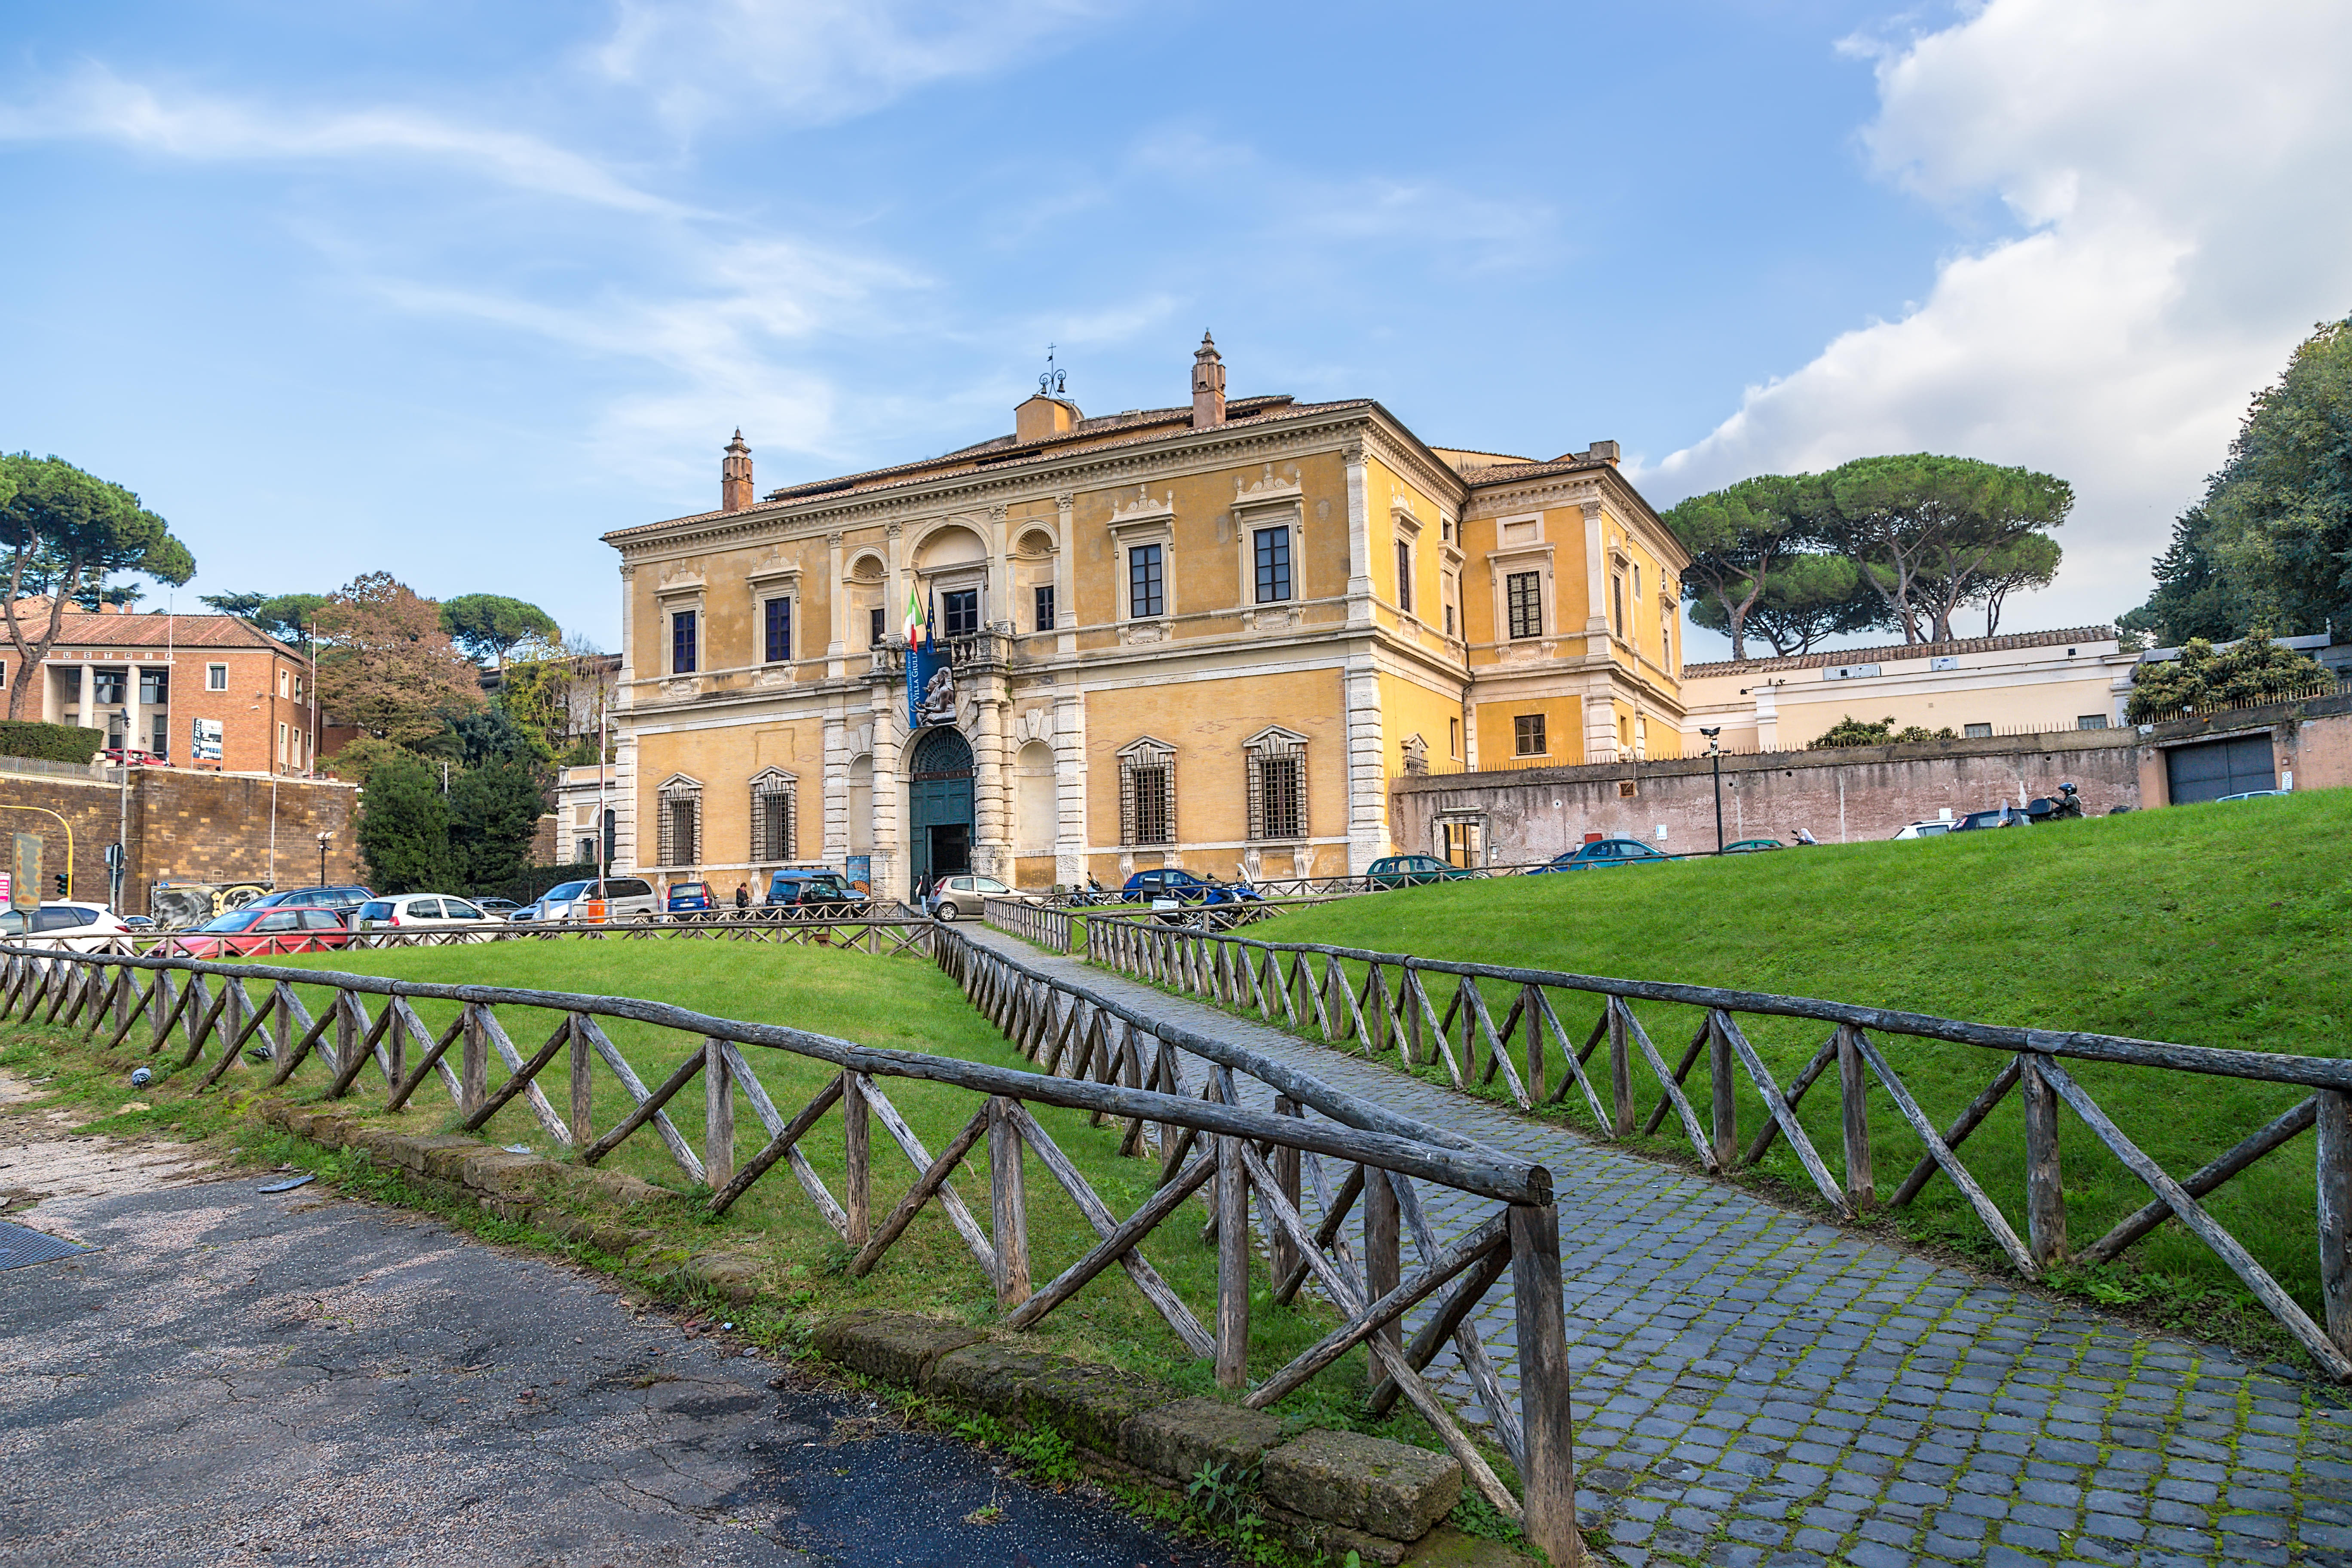 Welcome to the renowned National Etruscan Museum of Villa Giulia